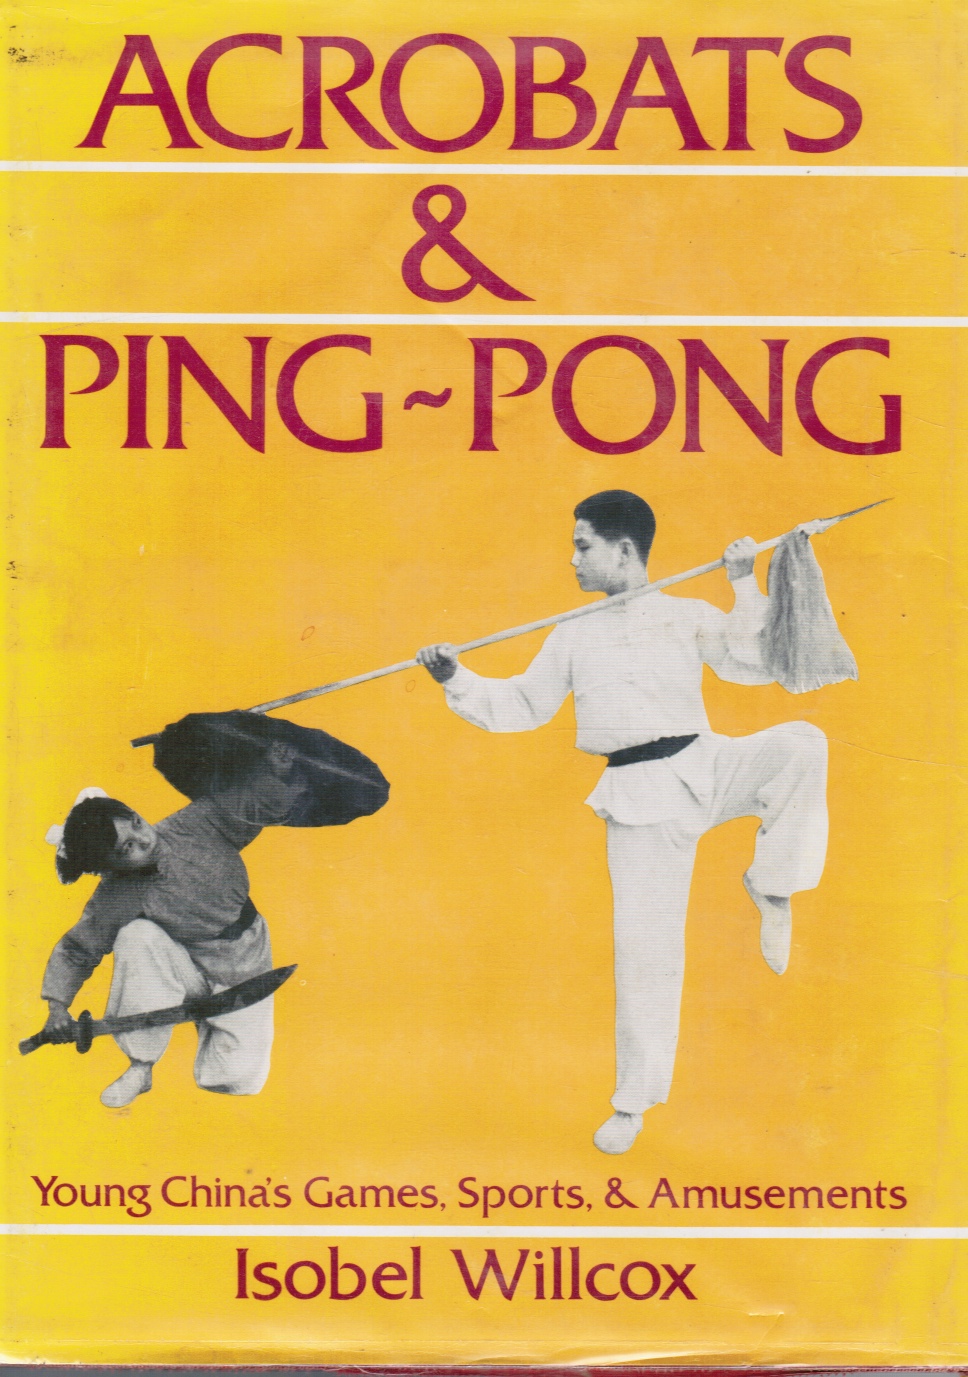 WILLCOX, ISOBEL - Acrobats and Ping-Pong: Young China's Games, Sports and Amusements